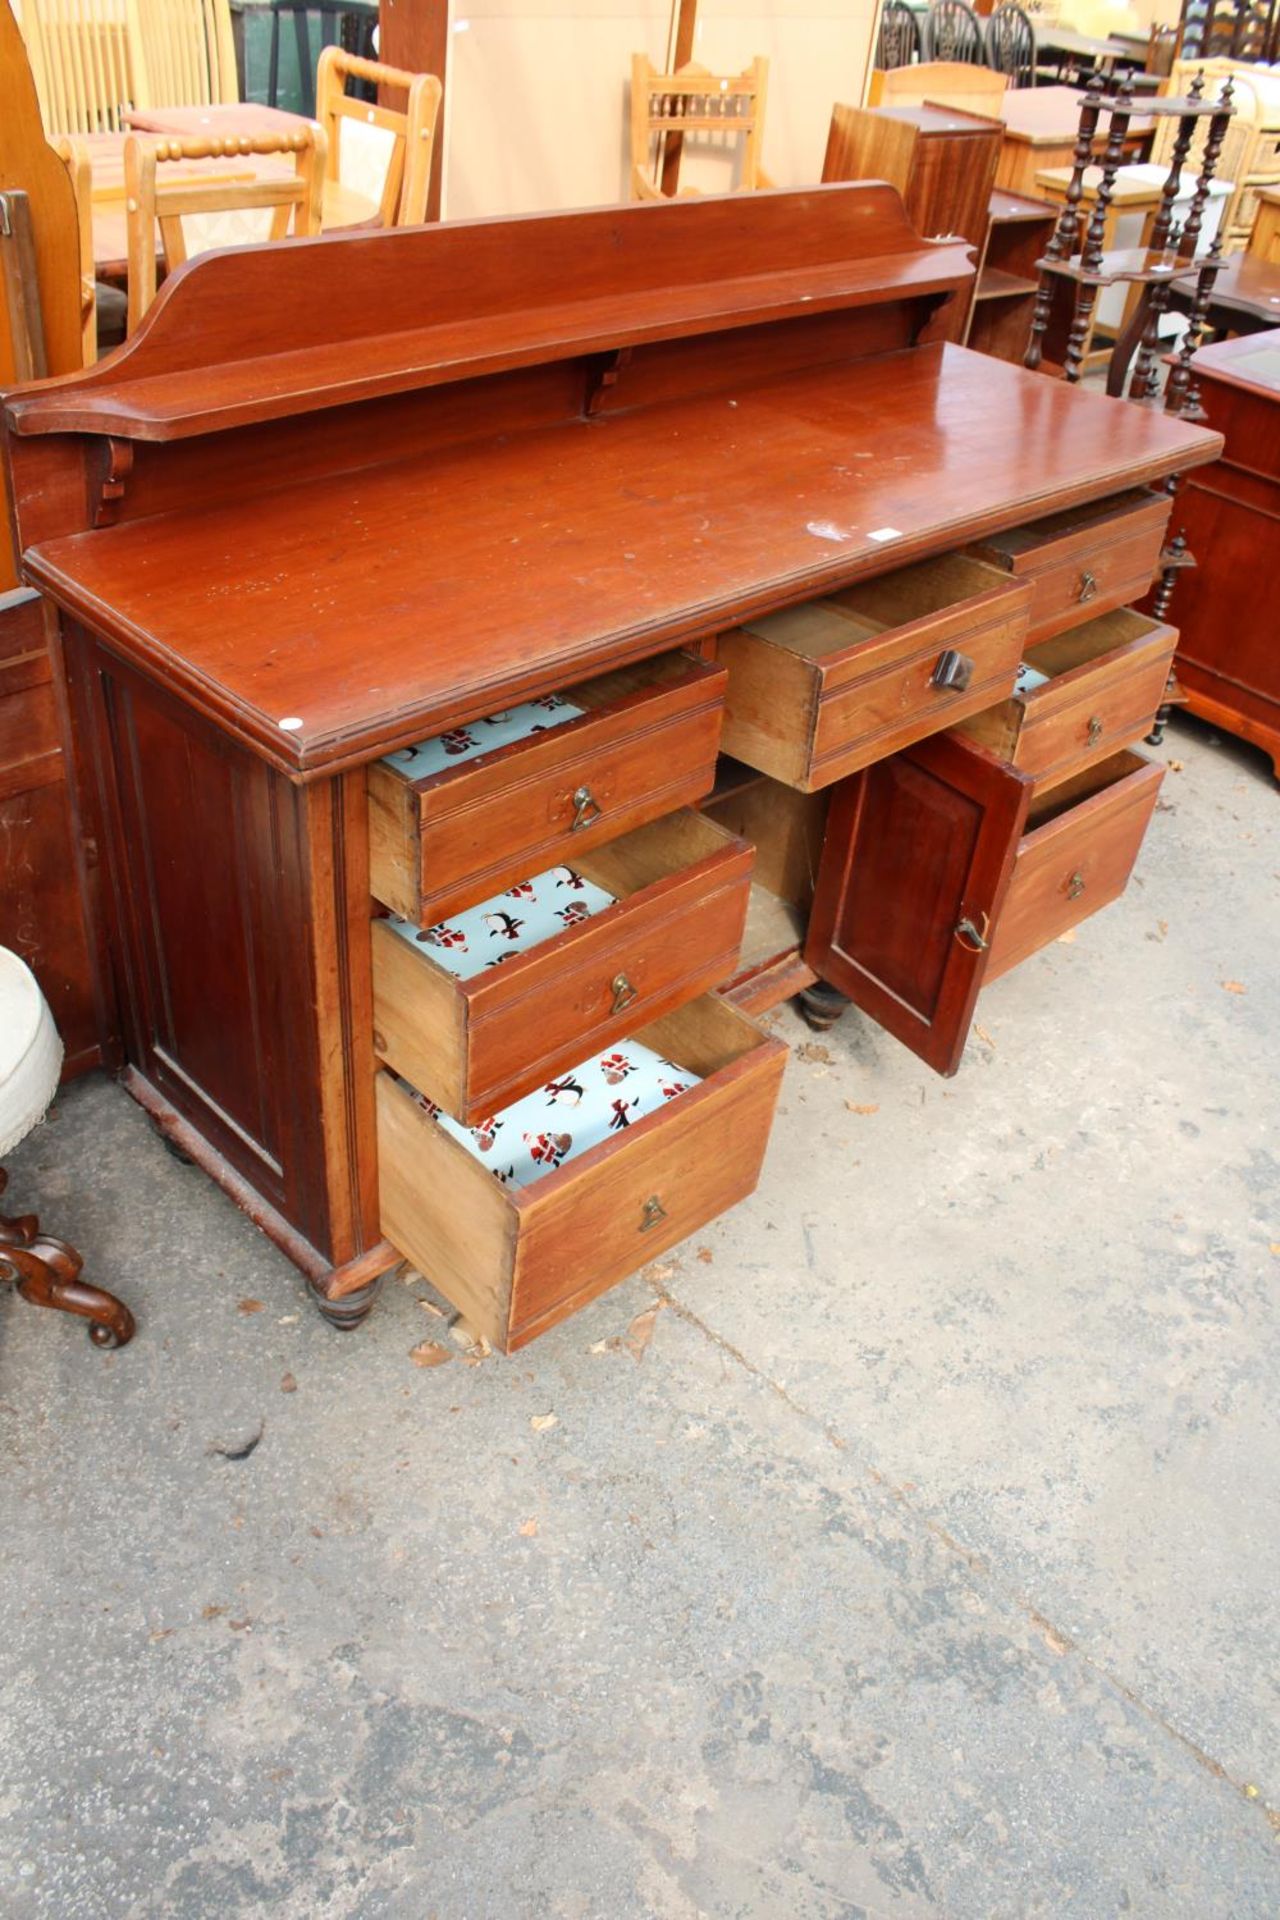 A LATE VICTORIAN MAHOGANY SIDEBOARD WITH RAISED BACK 60" WIDE - Image 3 of 3